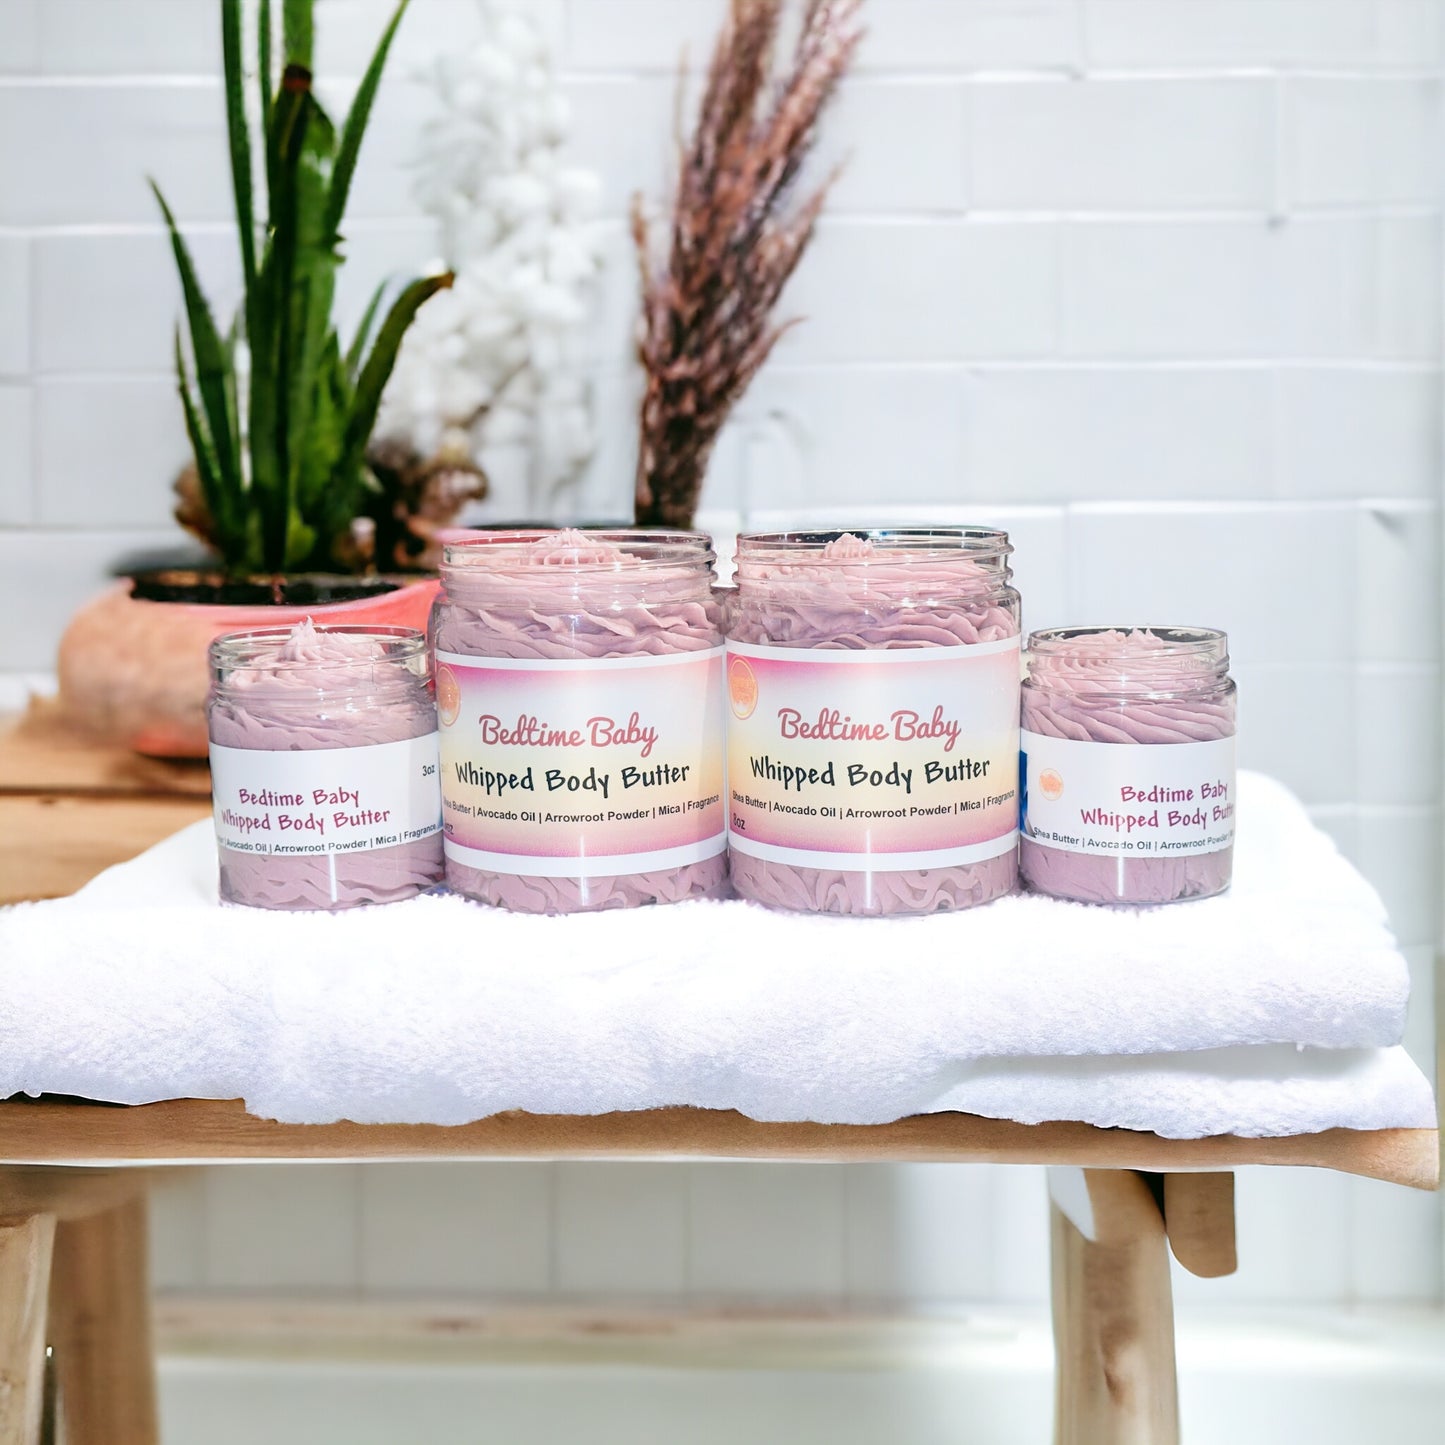 Bedtime Baby Whipped Body Butter